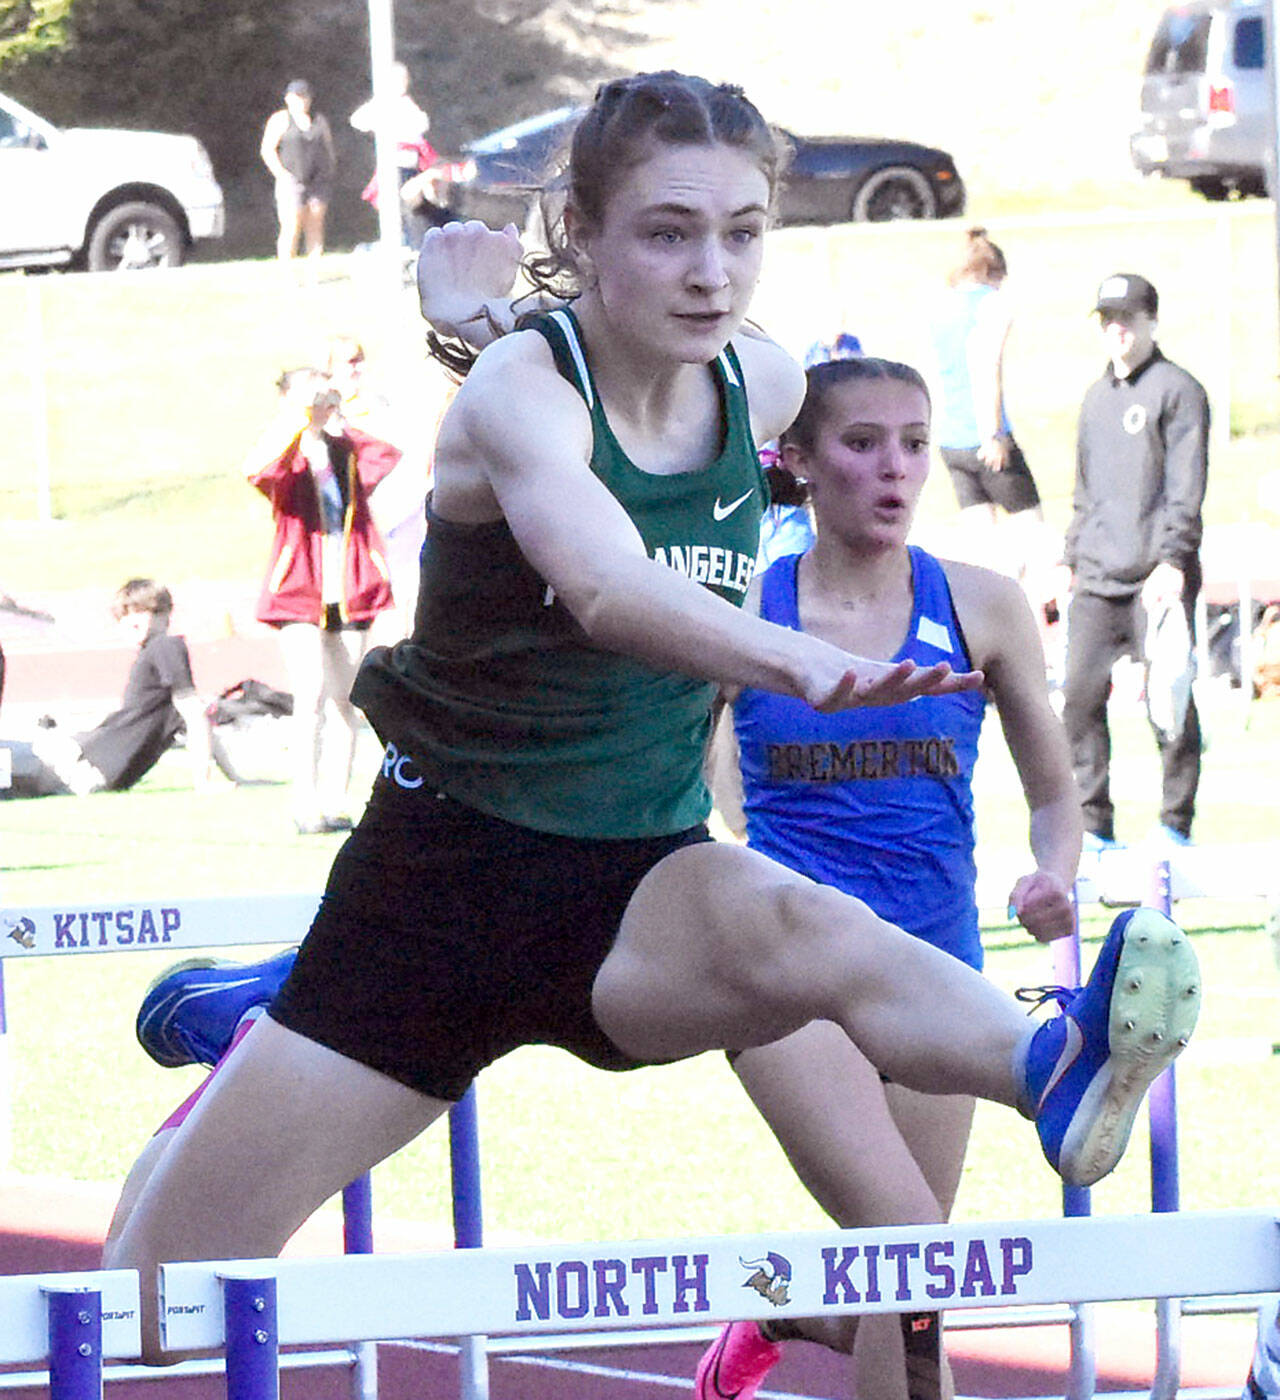 Nicholas Zellar-Singh/Kitsap News Group Port Angeles’ Faerin Tait leaps during the 100-meter hurdles Thursday at the Olympic League Track and Field Championship at North Kitsap High School.